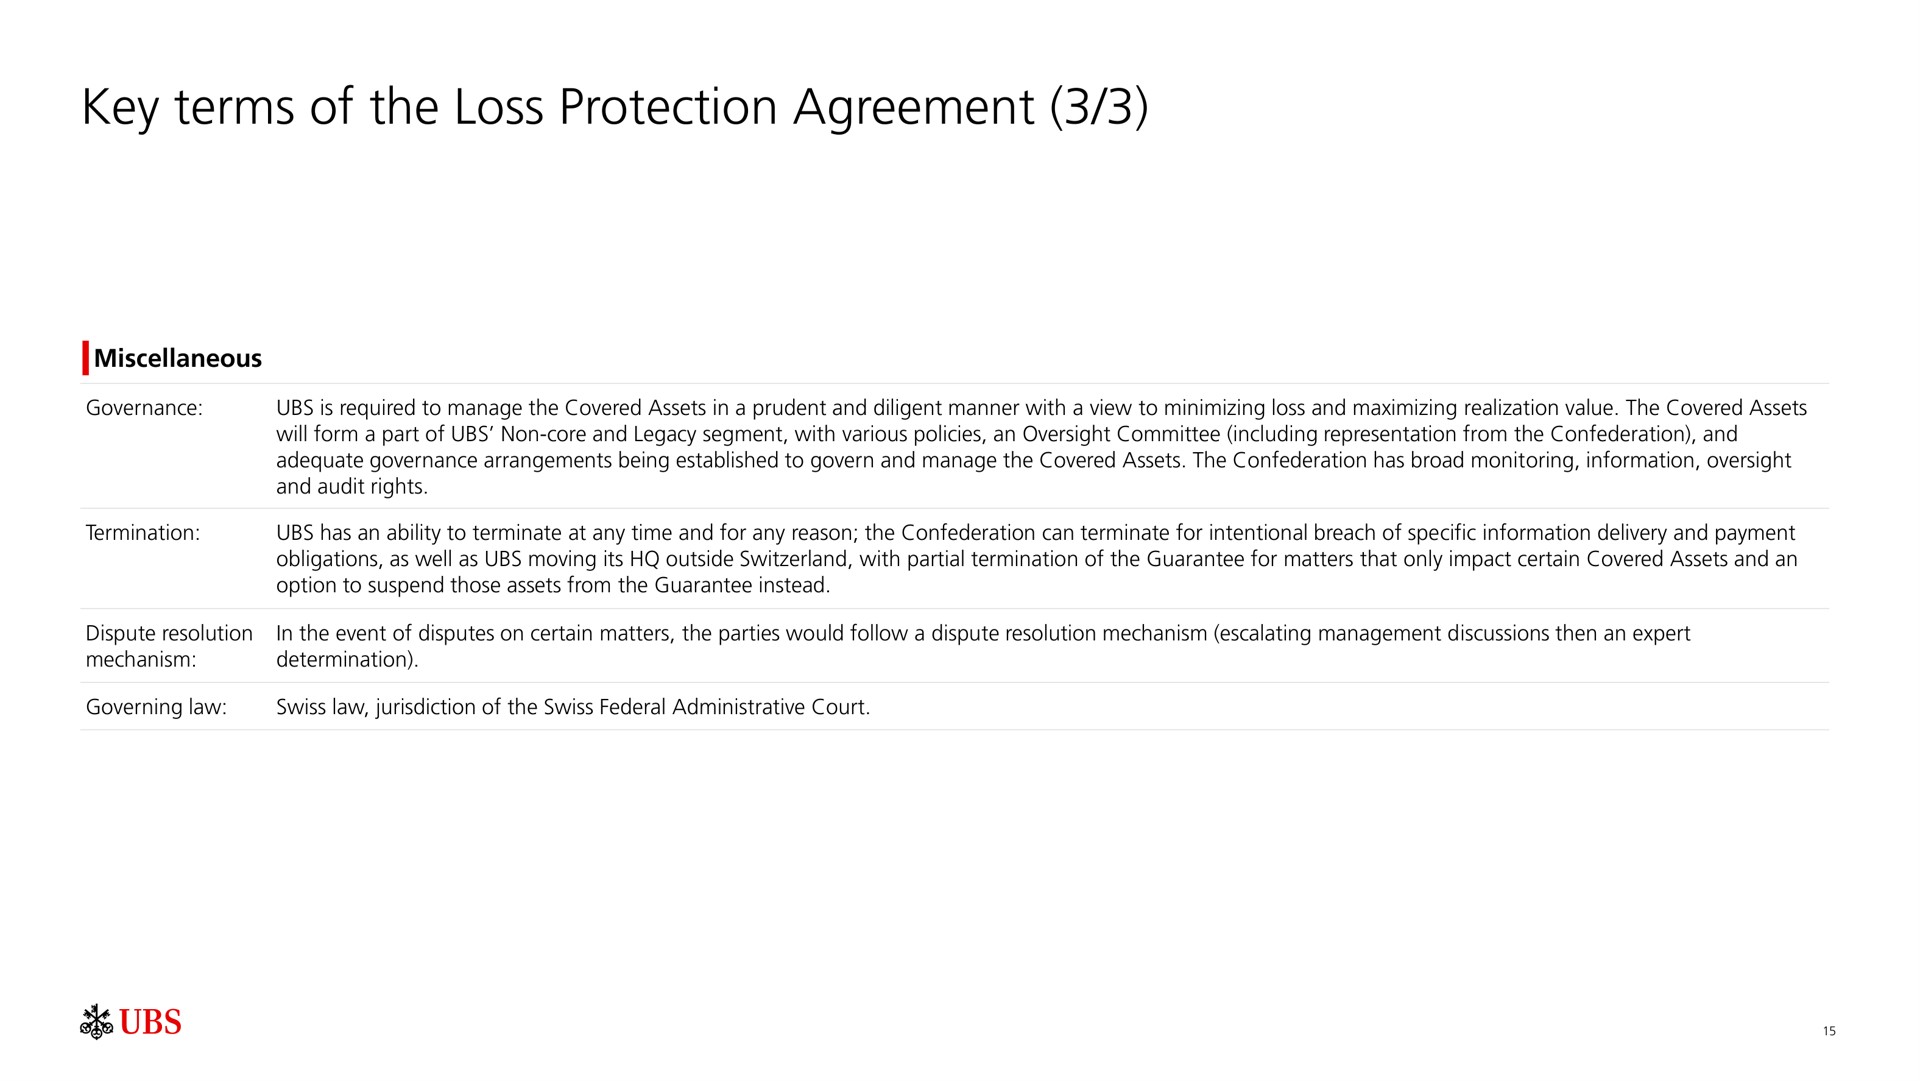 key terms of the loss protection agreement | UBS